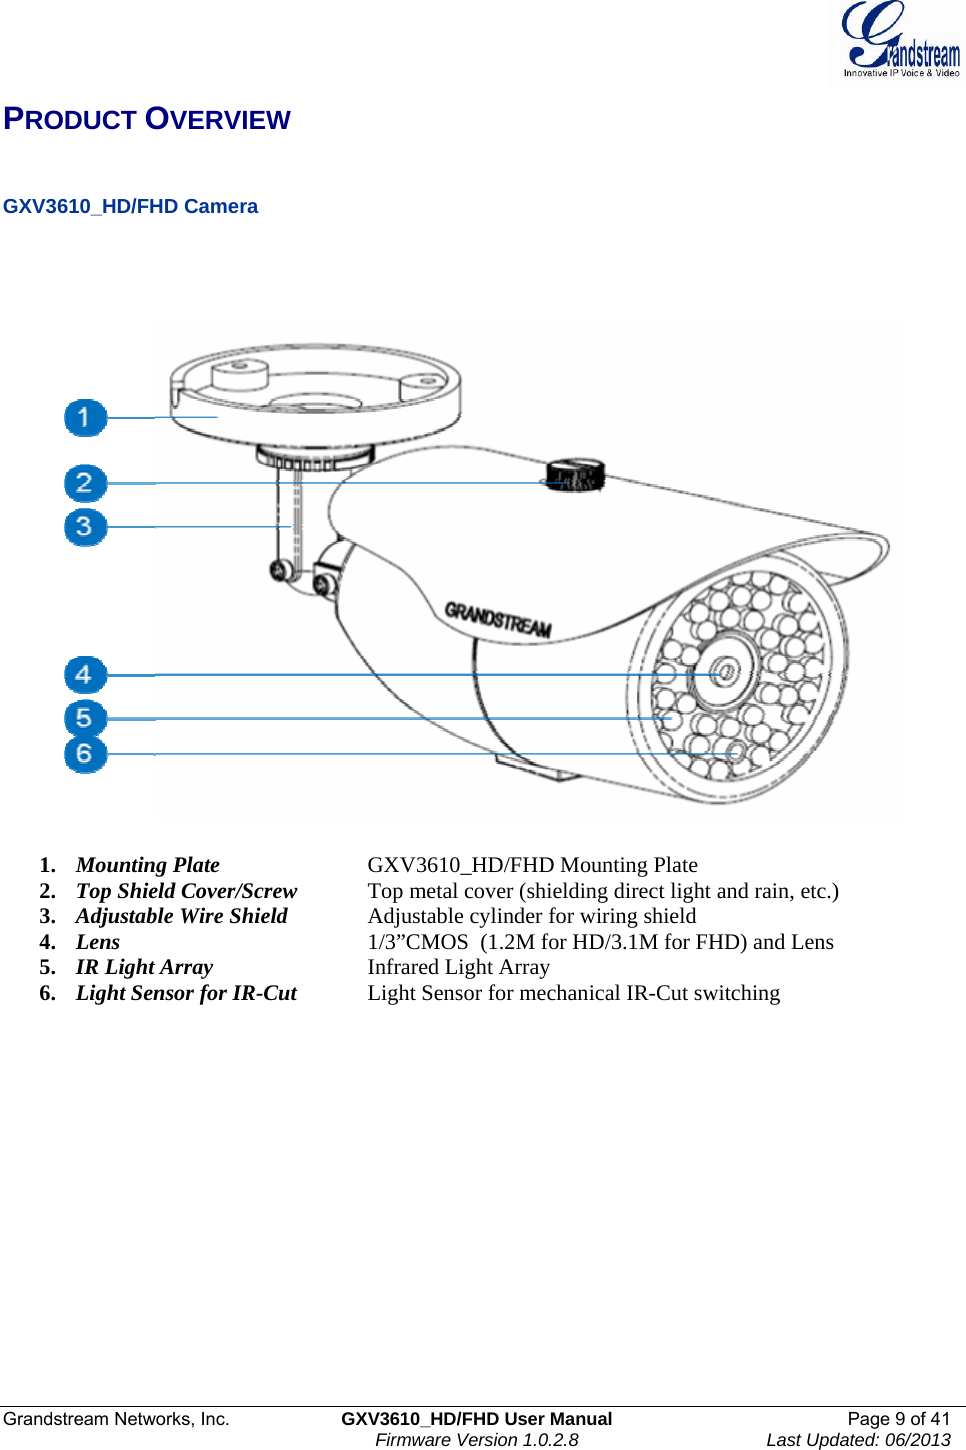  Grandstream Networks, Inc.  GXV3610_HD/FHD User Manual  Page 9 of 41    Firmware Version 1.0.2.8  Last Updated: 06/2013  PRODUCT OVERVIEW   GXV3610_HD/FHD Camera        1. Mounting Plate     GXV3610_HD/FHD Mounting Plate 2. Top Shield Cover/Screw  Top metal cover (shielding direct light and rain, etc.) 3. Adjustable Wire Shield   Adjustable cylinder for wiring shield 4. Lens       1/3”CMOS  (1.2M for HD/3.1M for FHD) and Lens  5. IR Light Array      Infrared Light Array 6. Light Sensor for IR-Cut  Light Sensor for mechanical IR-Cut switching   